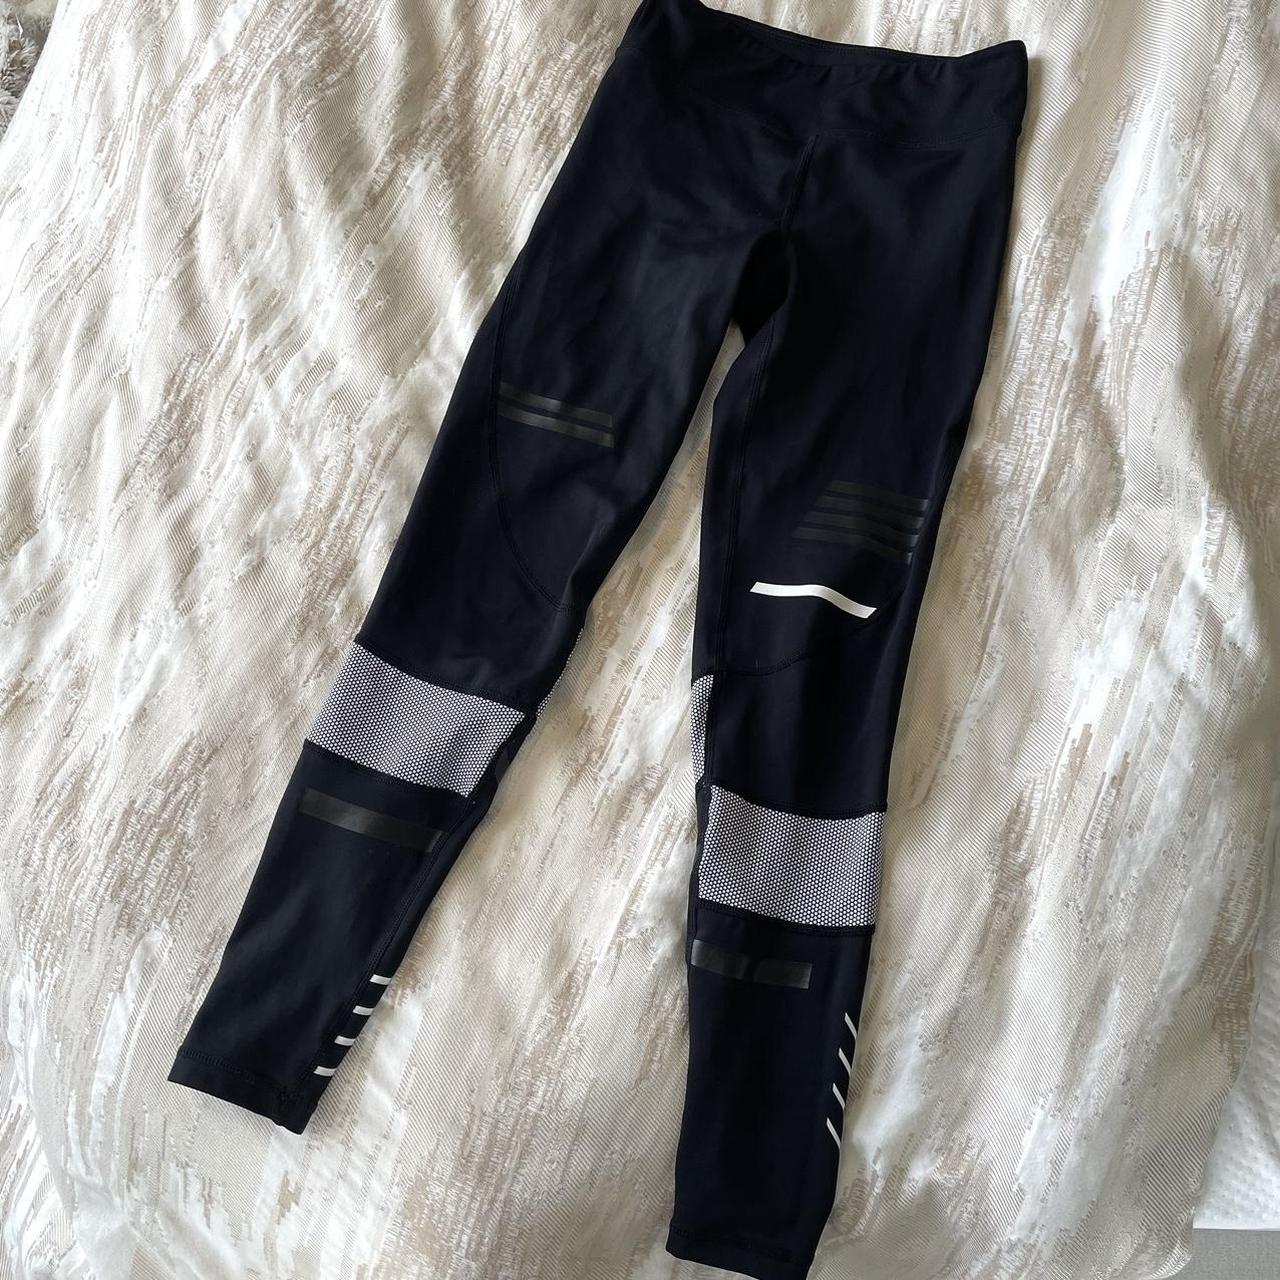 Lilybod leggings, size XS Great condition. - Depop